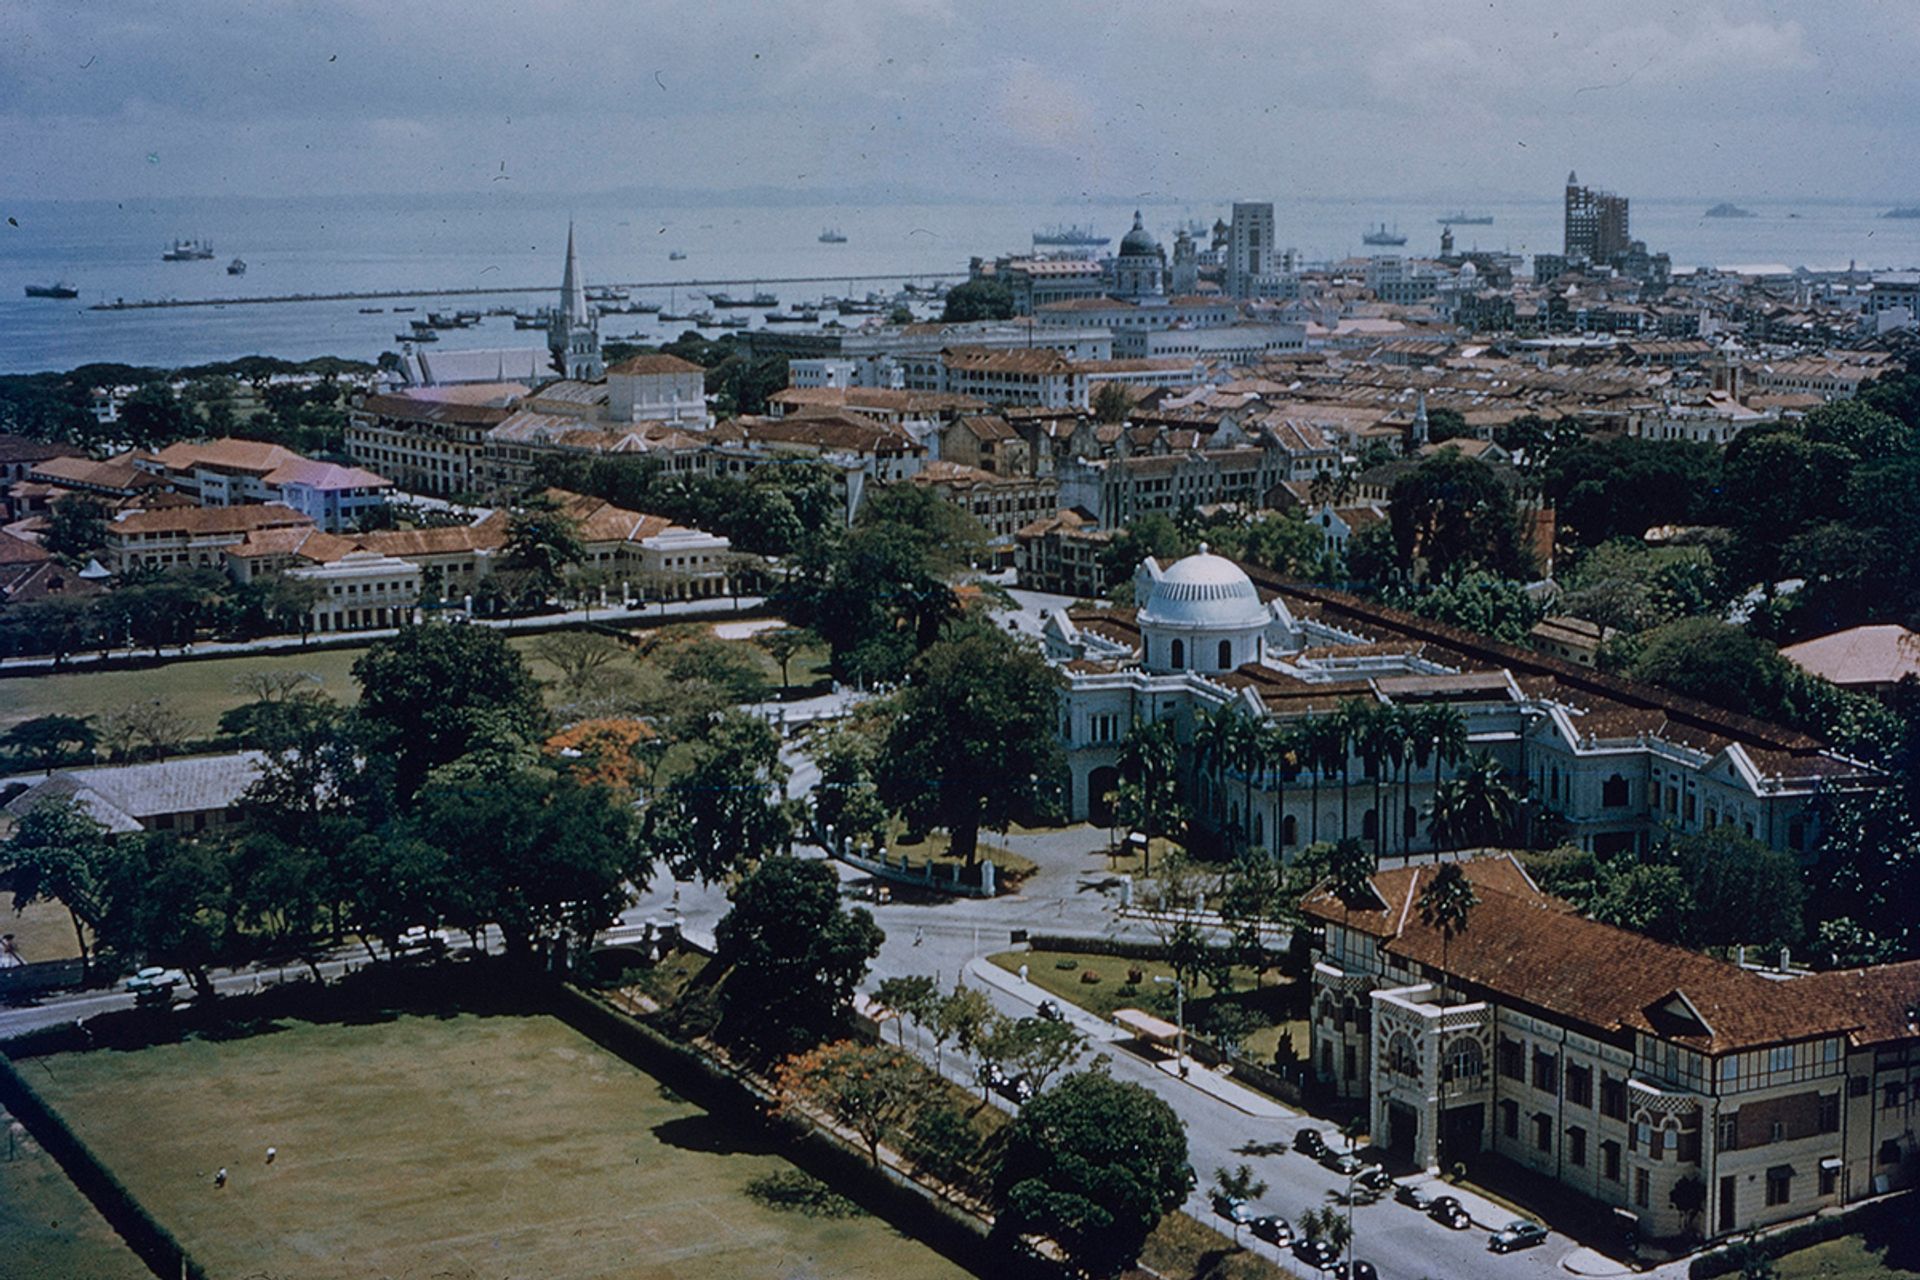 A view of Stamford Road facing the harbour, with the National Museum and old YMCA building on the right, and St Andrew’s Cathedral and the Supreme Court building in the background. This photograph was taken in the late 1950s, before the construction of the National Library Building in Stamford Road.